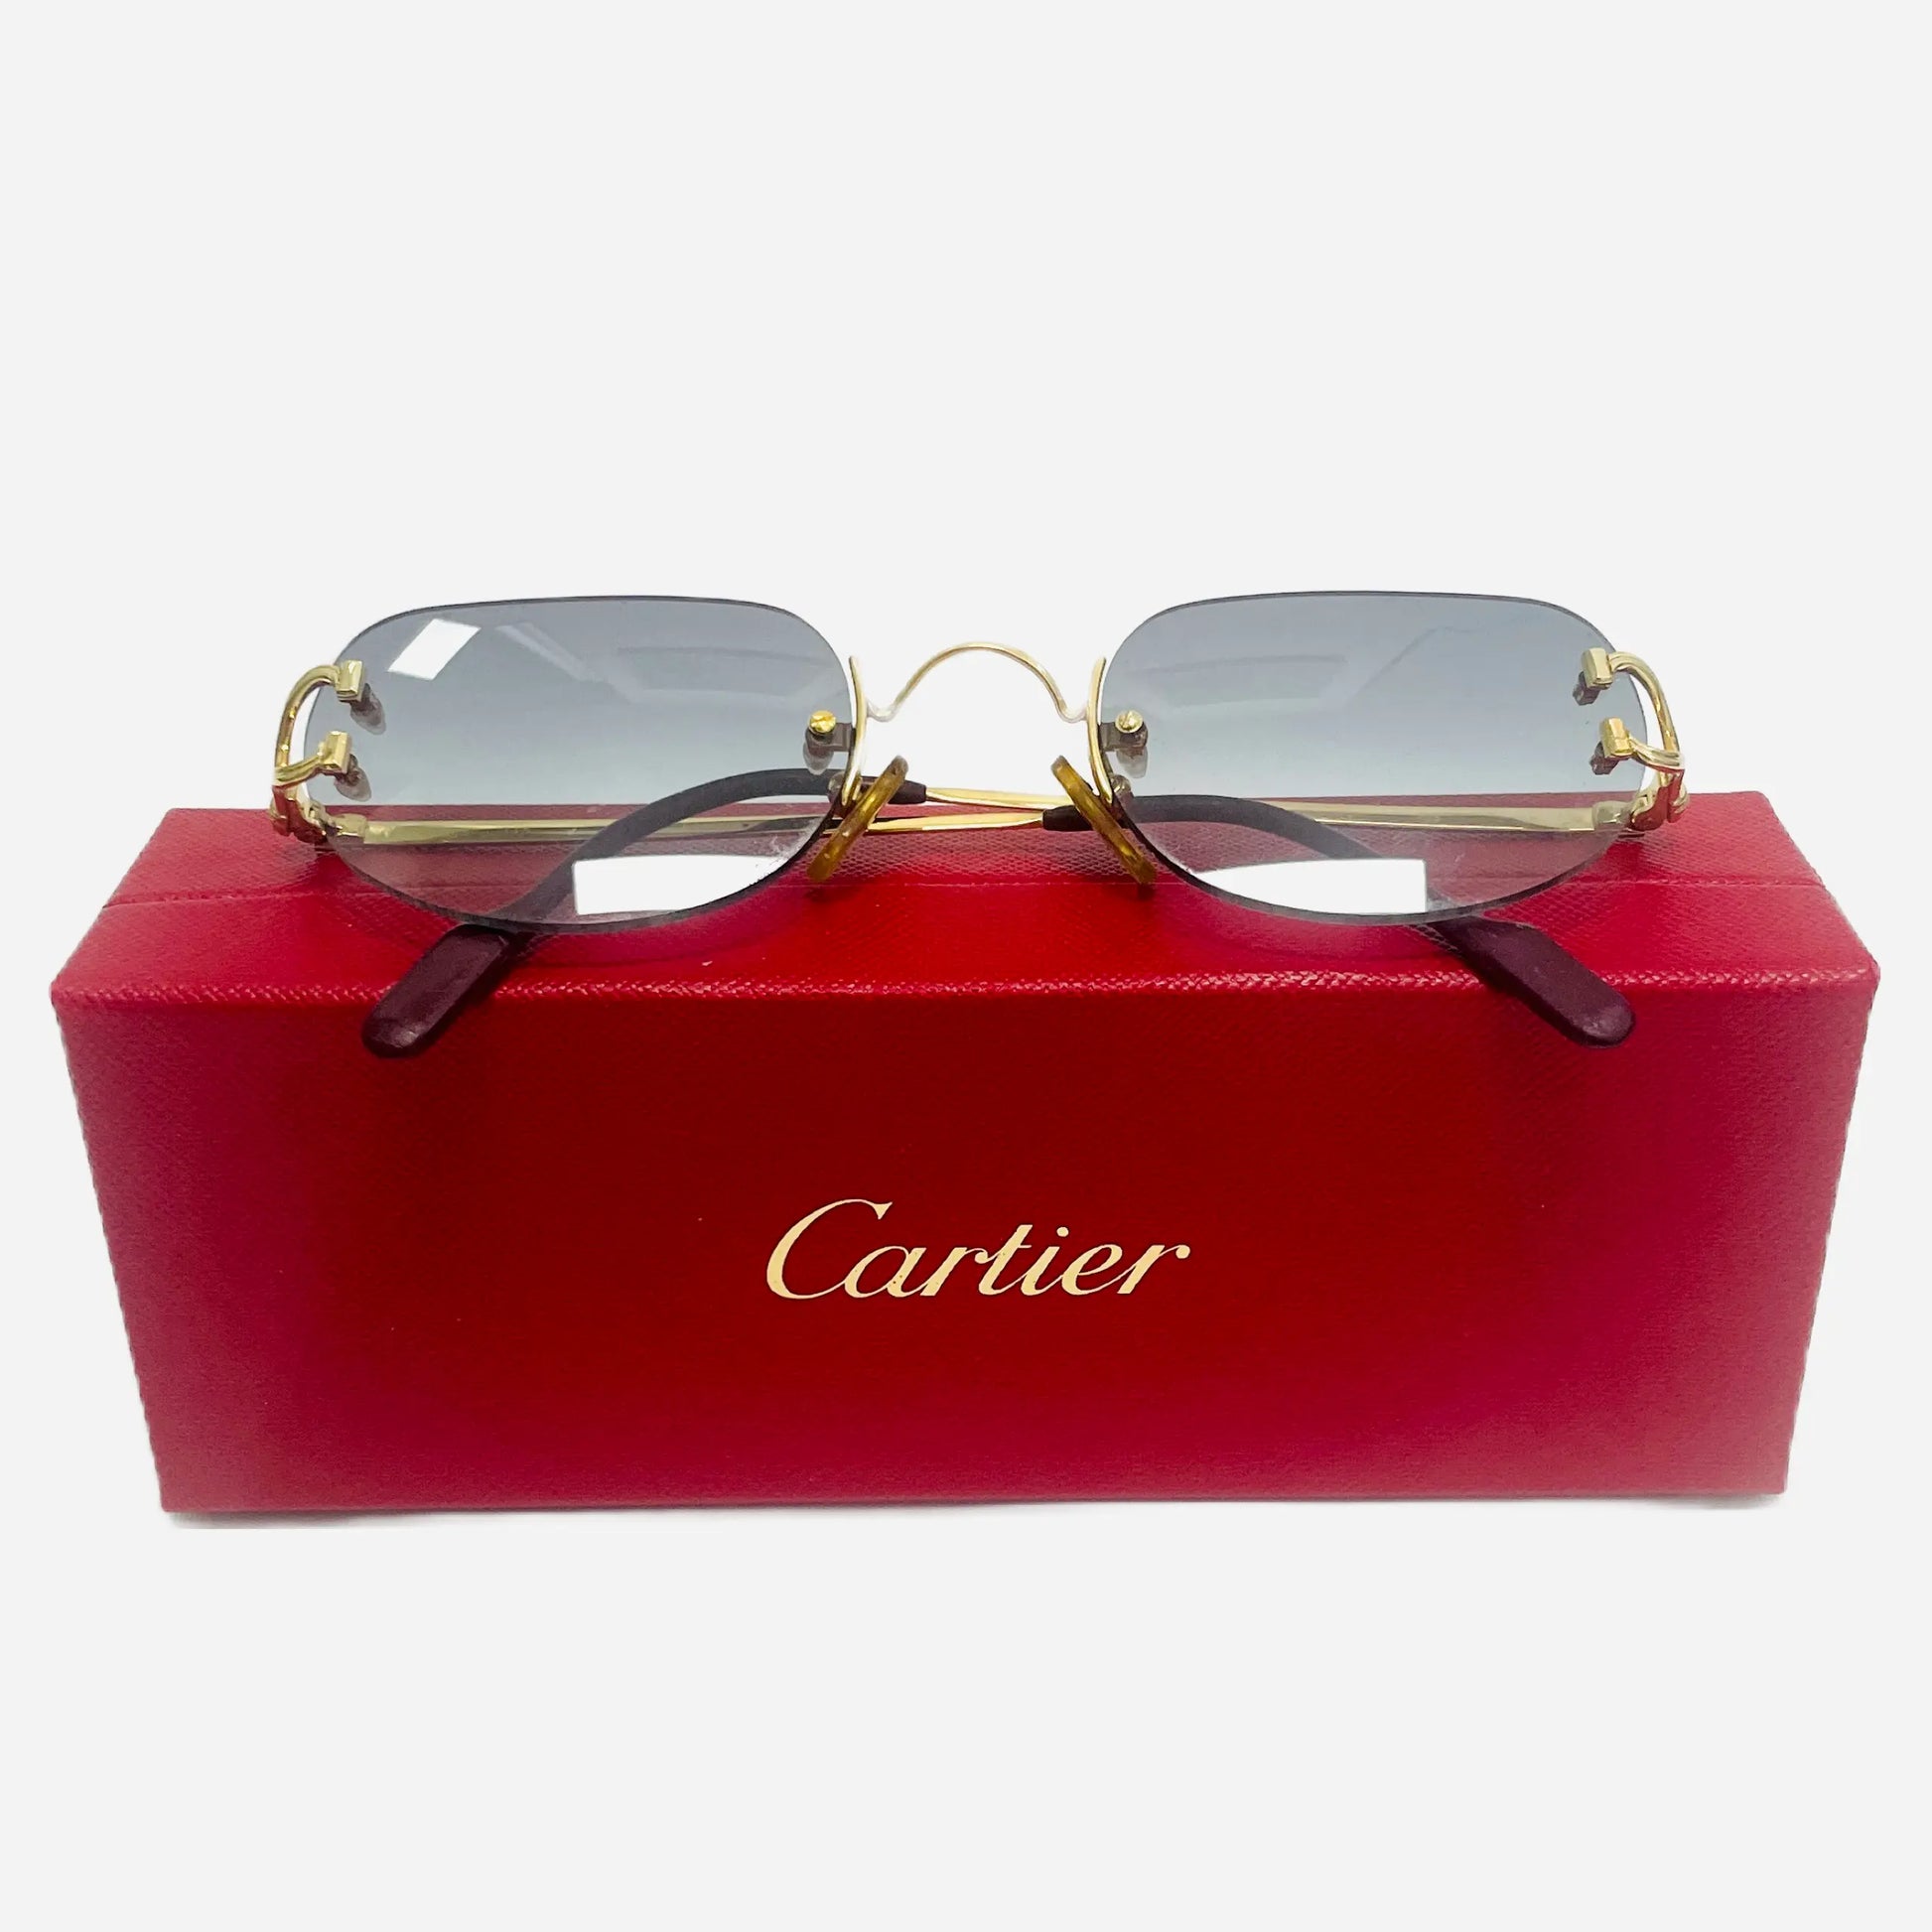 Vintage-Cartier-Big-C-Sonnenbrille-Sunglasses-22CT-Gold-Plated-the-seekers-with-box